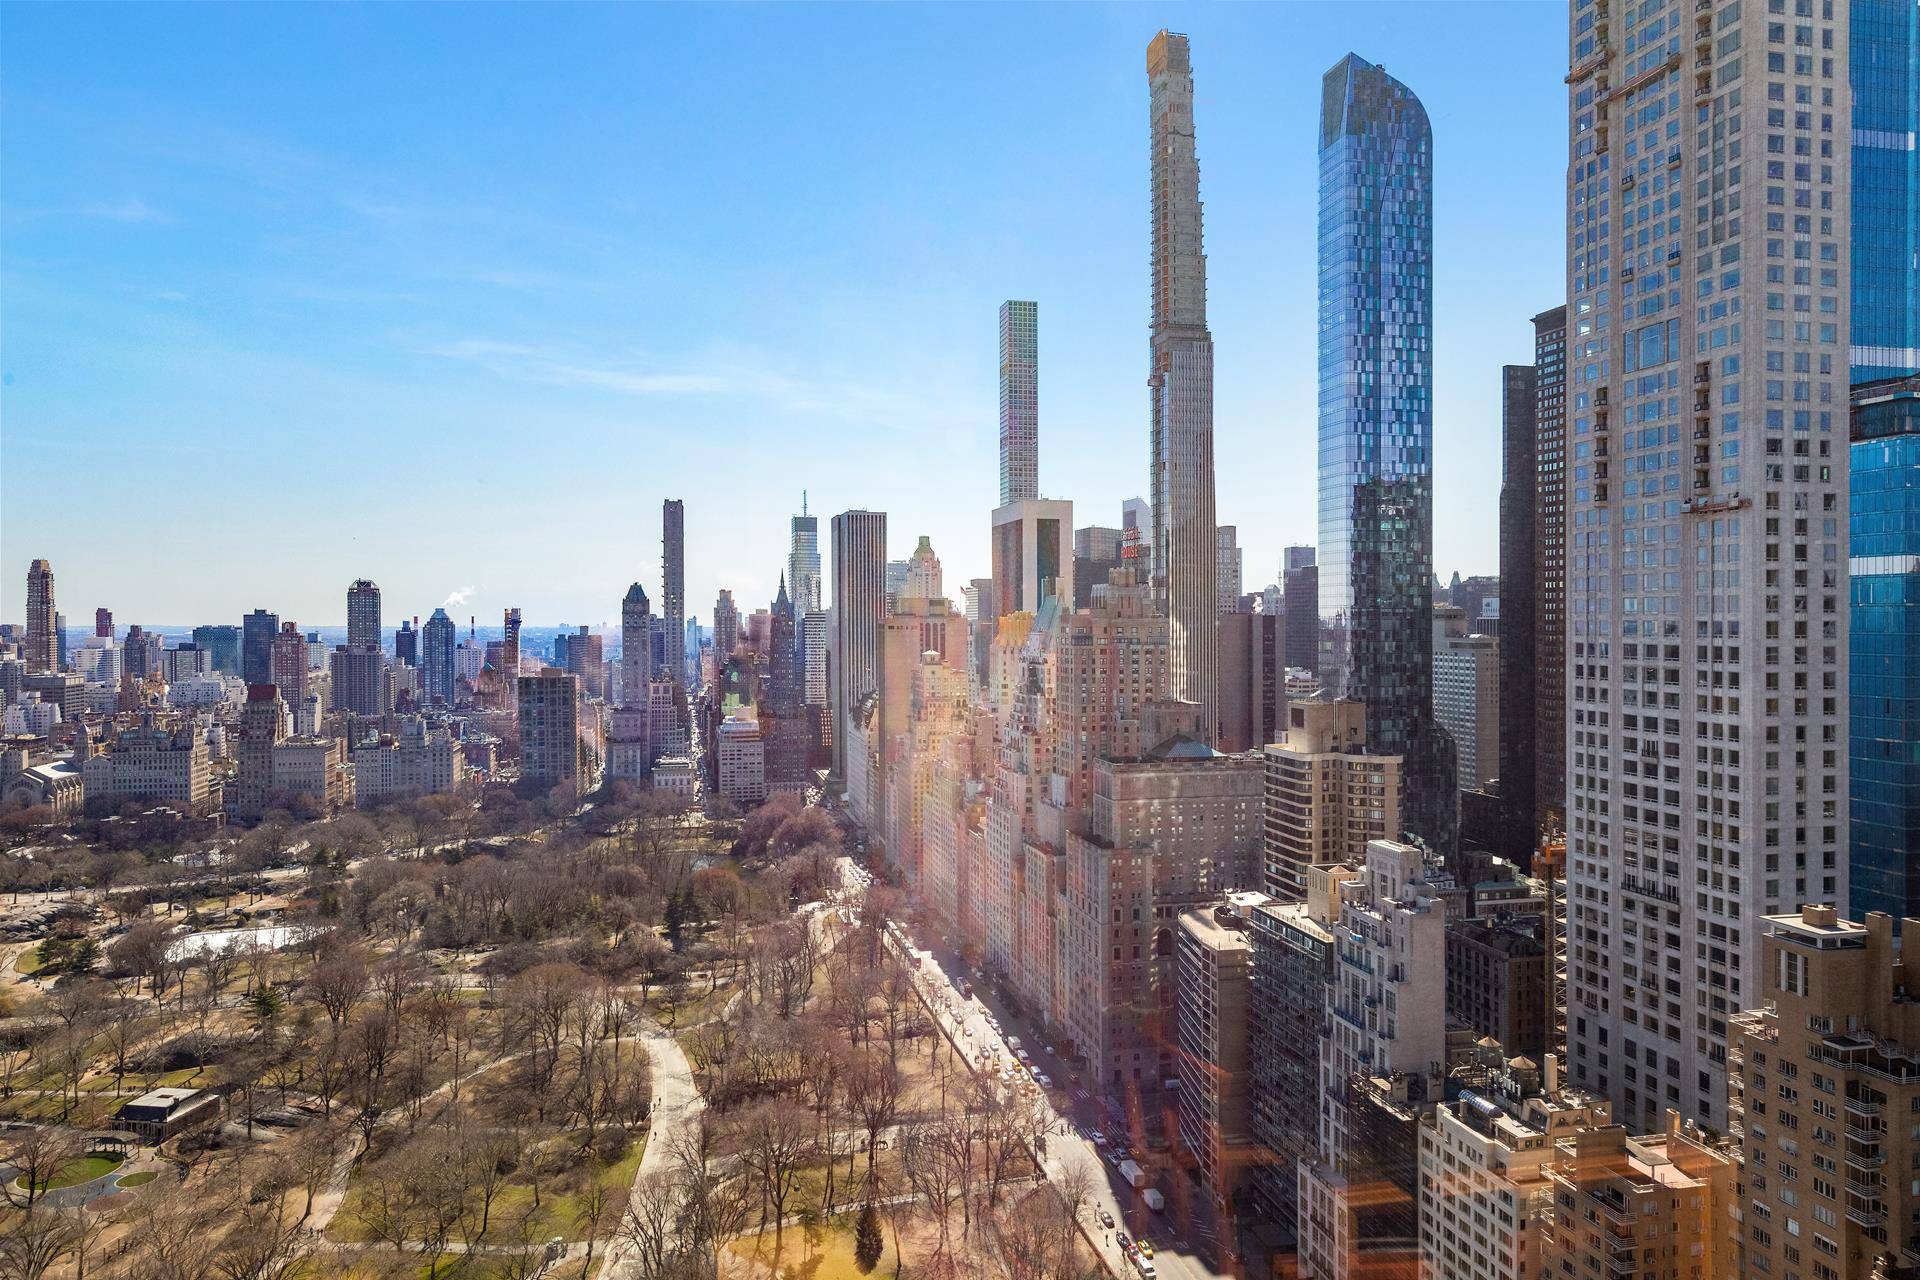 Located on the 40th floor of one of the most coveted condominiums in NYC, this 3 bedroom, 3.